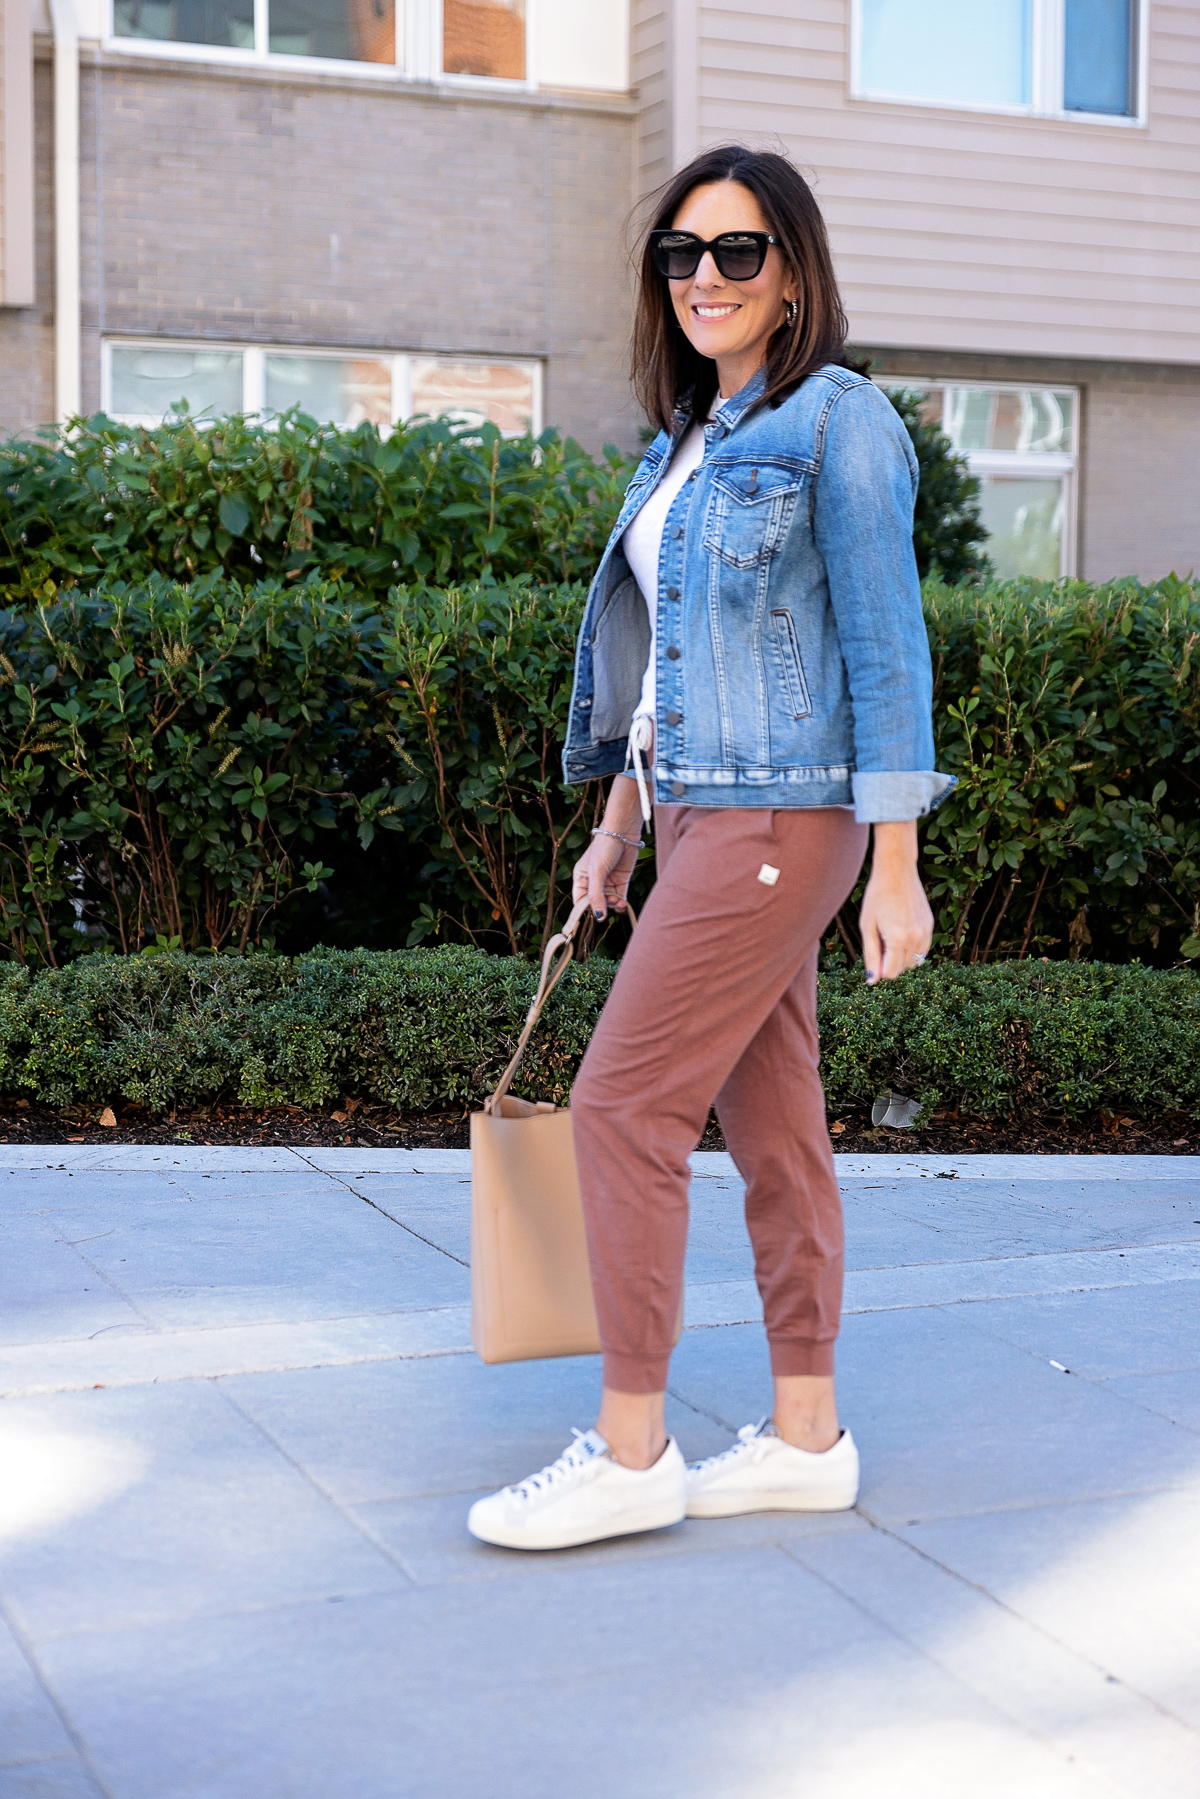 Luxe Vuori Pants That Can Go Anywhere: 2 Outfit Ideas - The Mom Edit